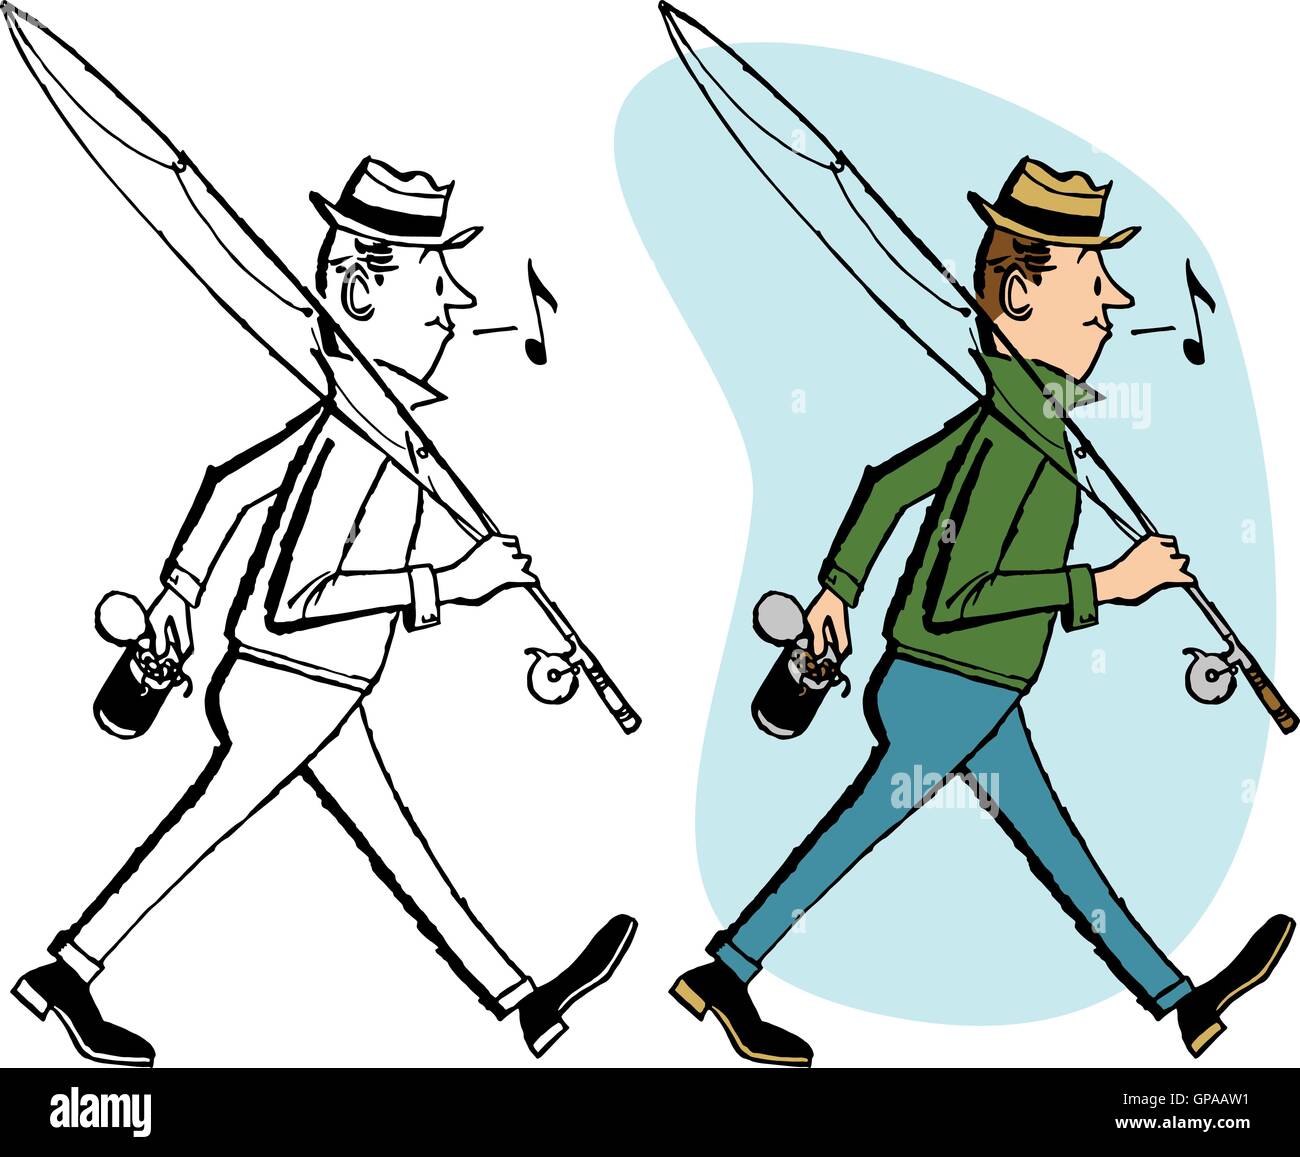 Fisherman with fishing rod. Stock Vector